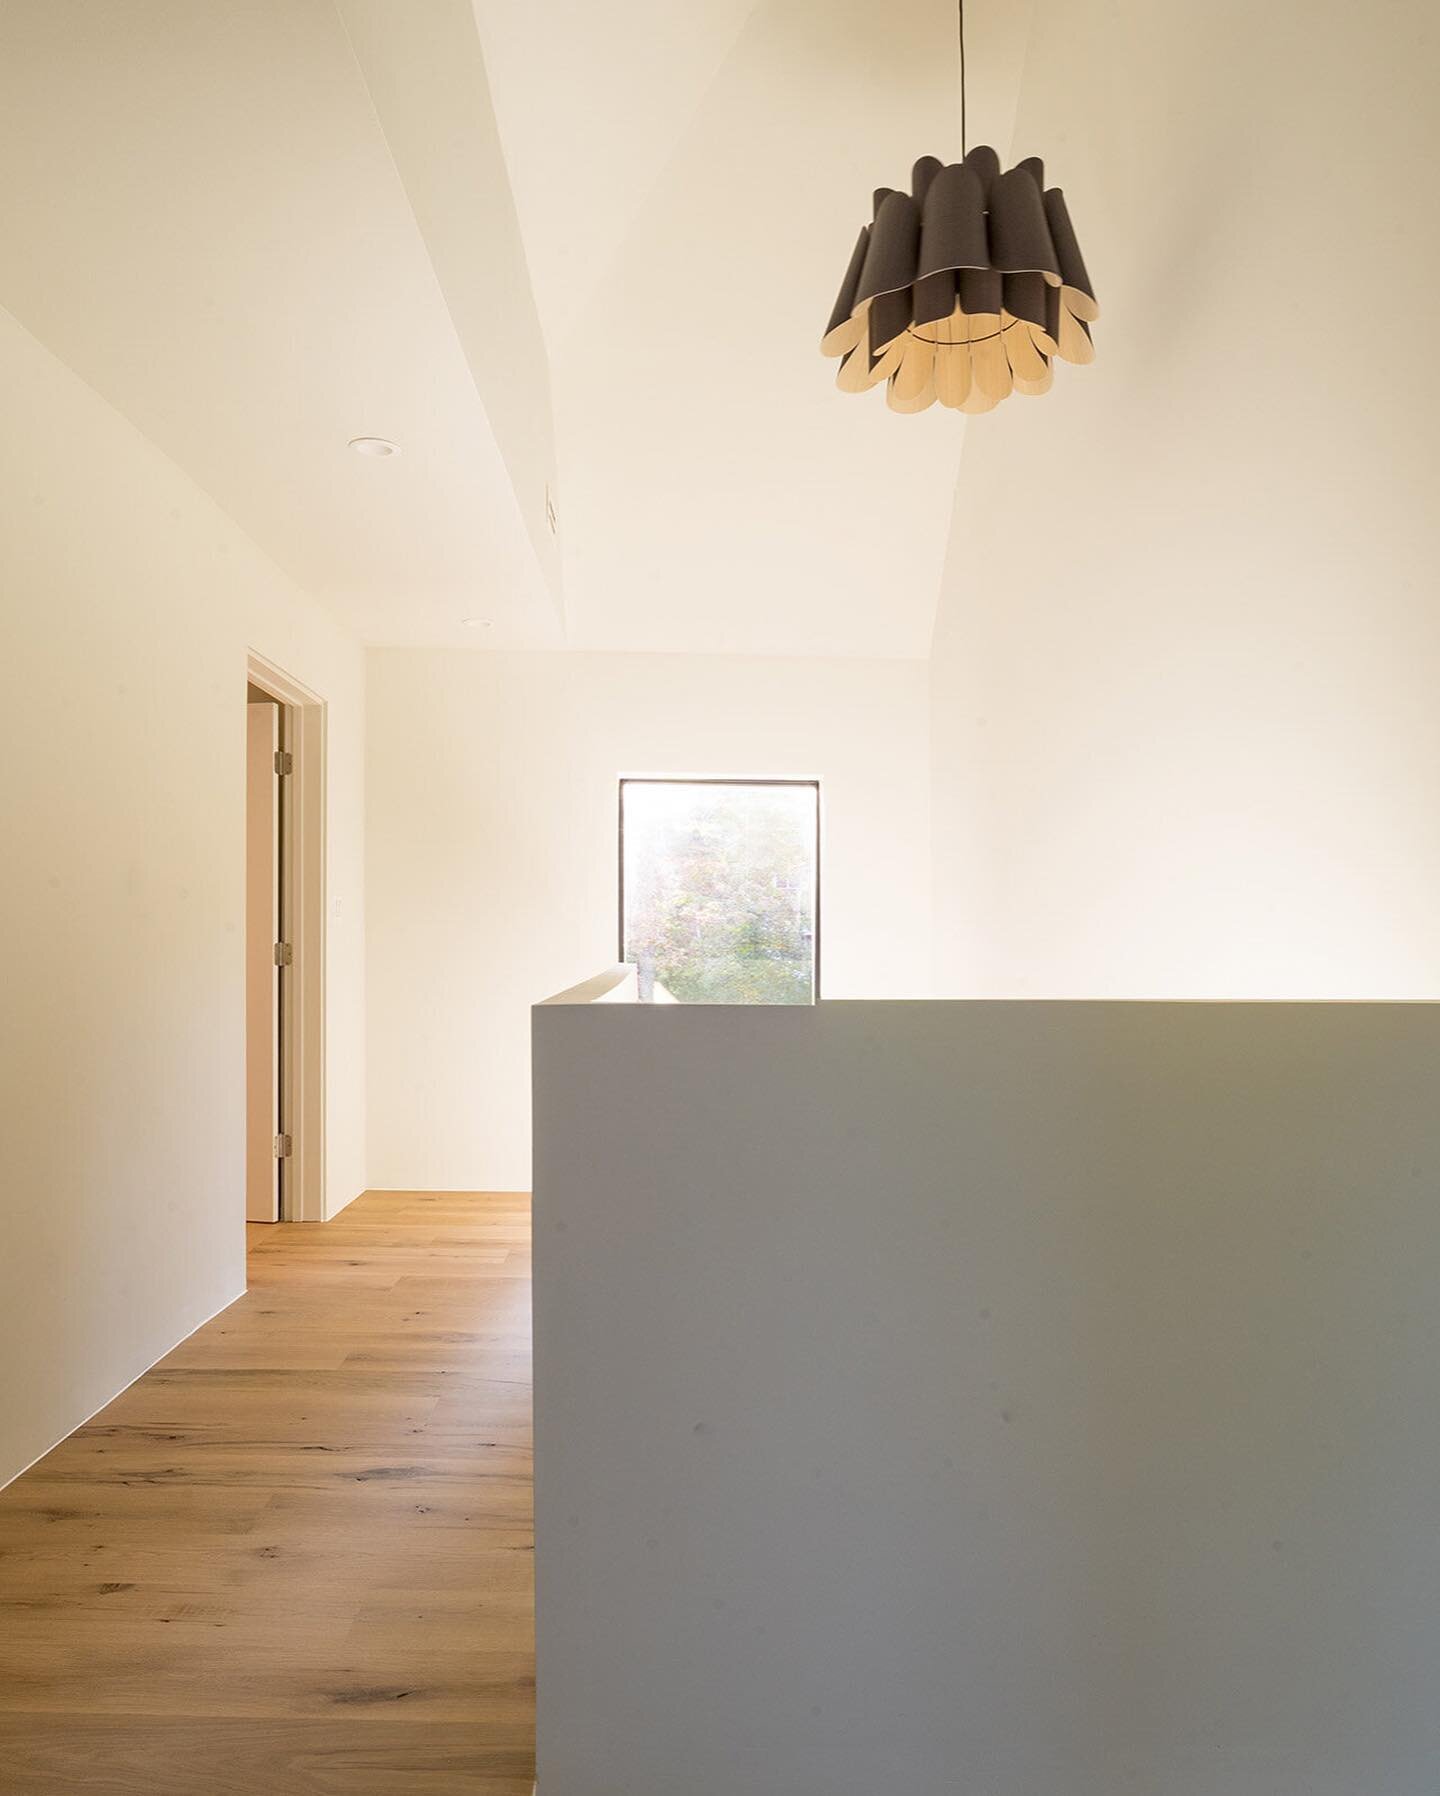 Throwback to a contemporary home renovation we did in Northwest DC. Don&rsquo;t you just love the warmth of natural light on a white wall? 😍 #contemporaryarchitecture #naturallight #interiordesign #dcarchitecture #residentialarchitecture